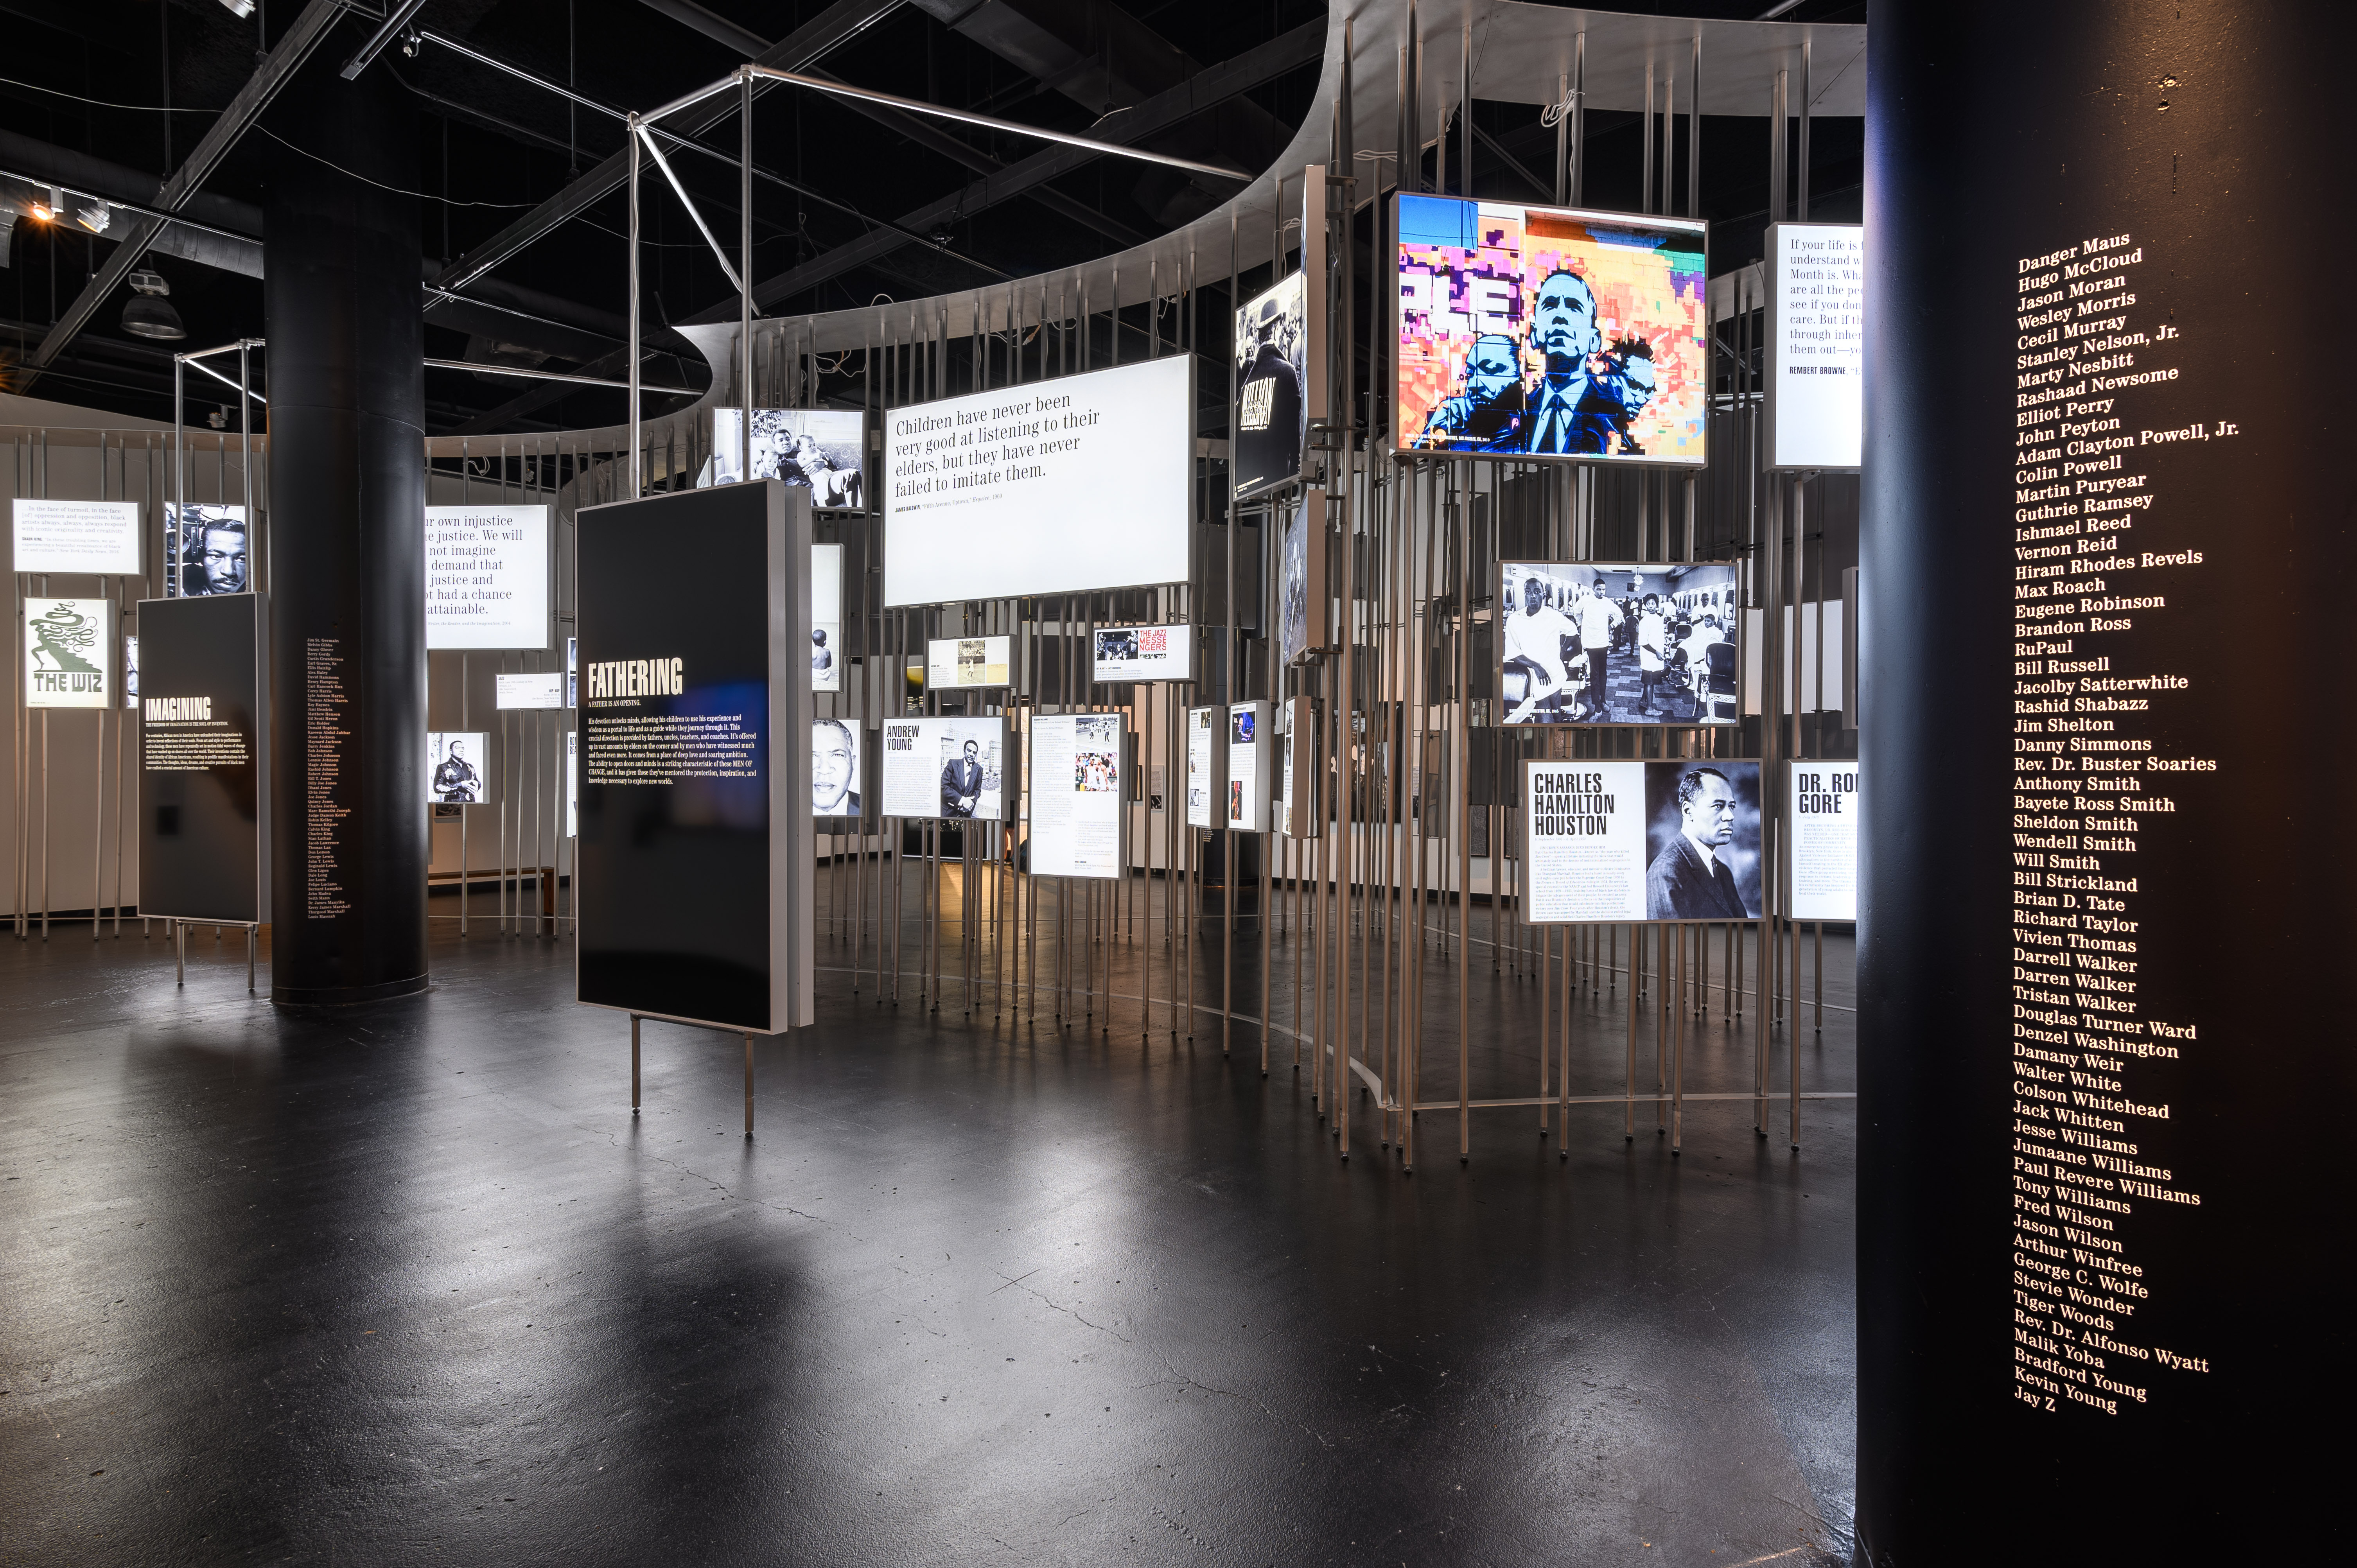 Image: Installation view of Men of Change. The installation made of metal poles is in the middle of the room. Light boxes of various sizes featuring photos and text are hung on the metal poles. Two large displays are in front of the poles: one says IMAGINING and the other says FATHERING. Two large, black architectural columns, one on the right of the image and one on the left of the image feature the names of men of color in alphabetical order. Photo by Phil Armstrong. Photo courtesy of the Smithsonian Institution Traveling Exhibition Service.